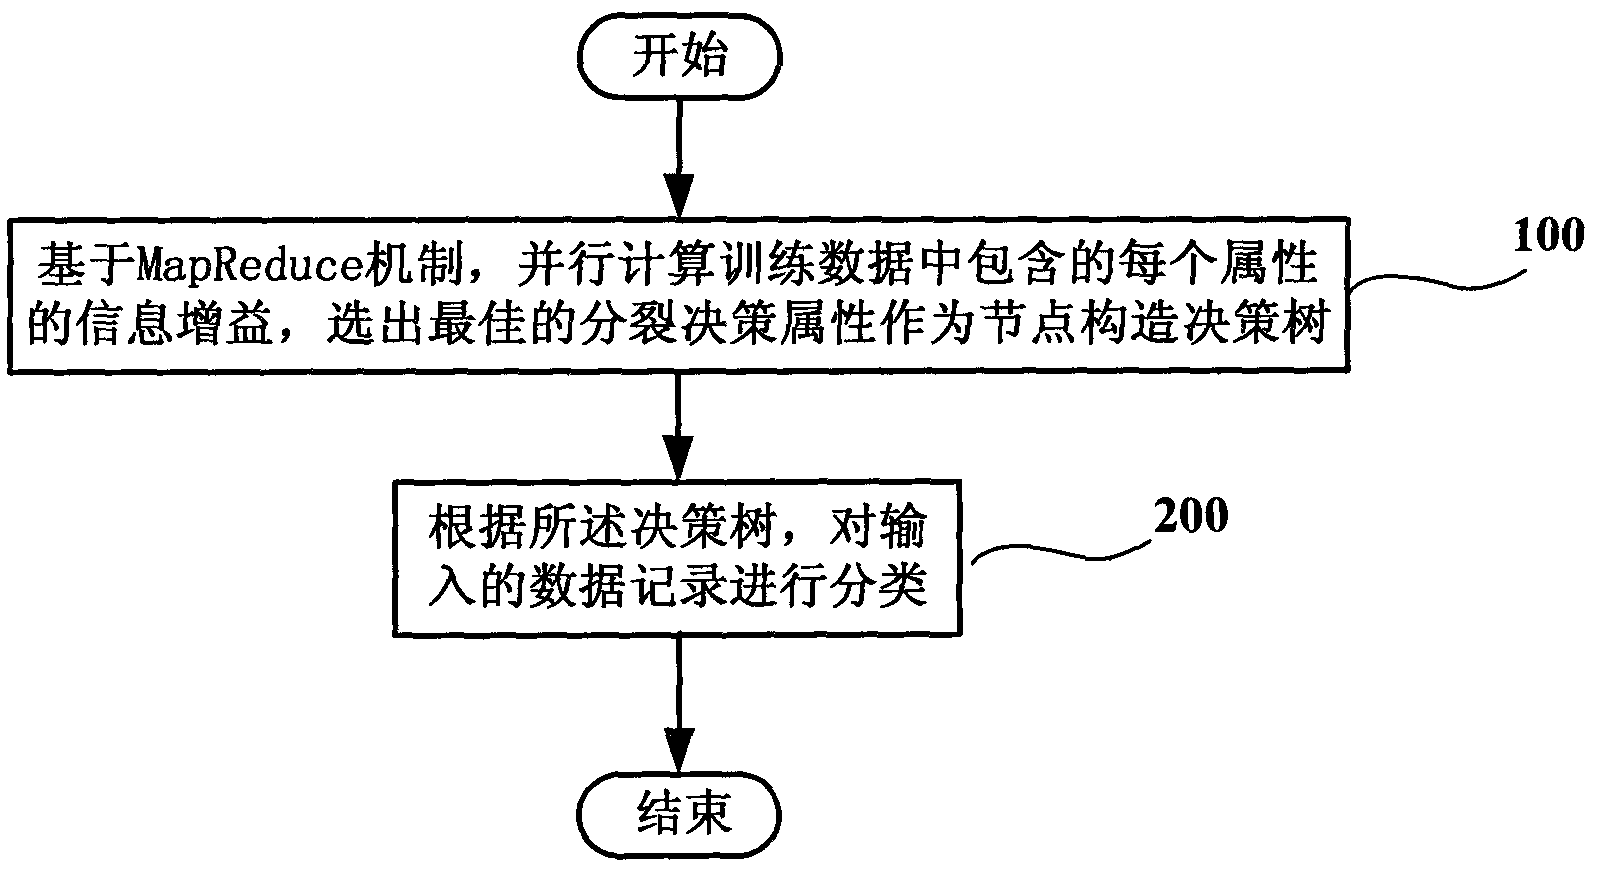 Method and system for classifying data by adopting decision tree